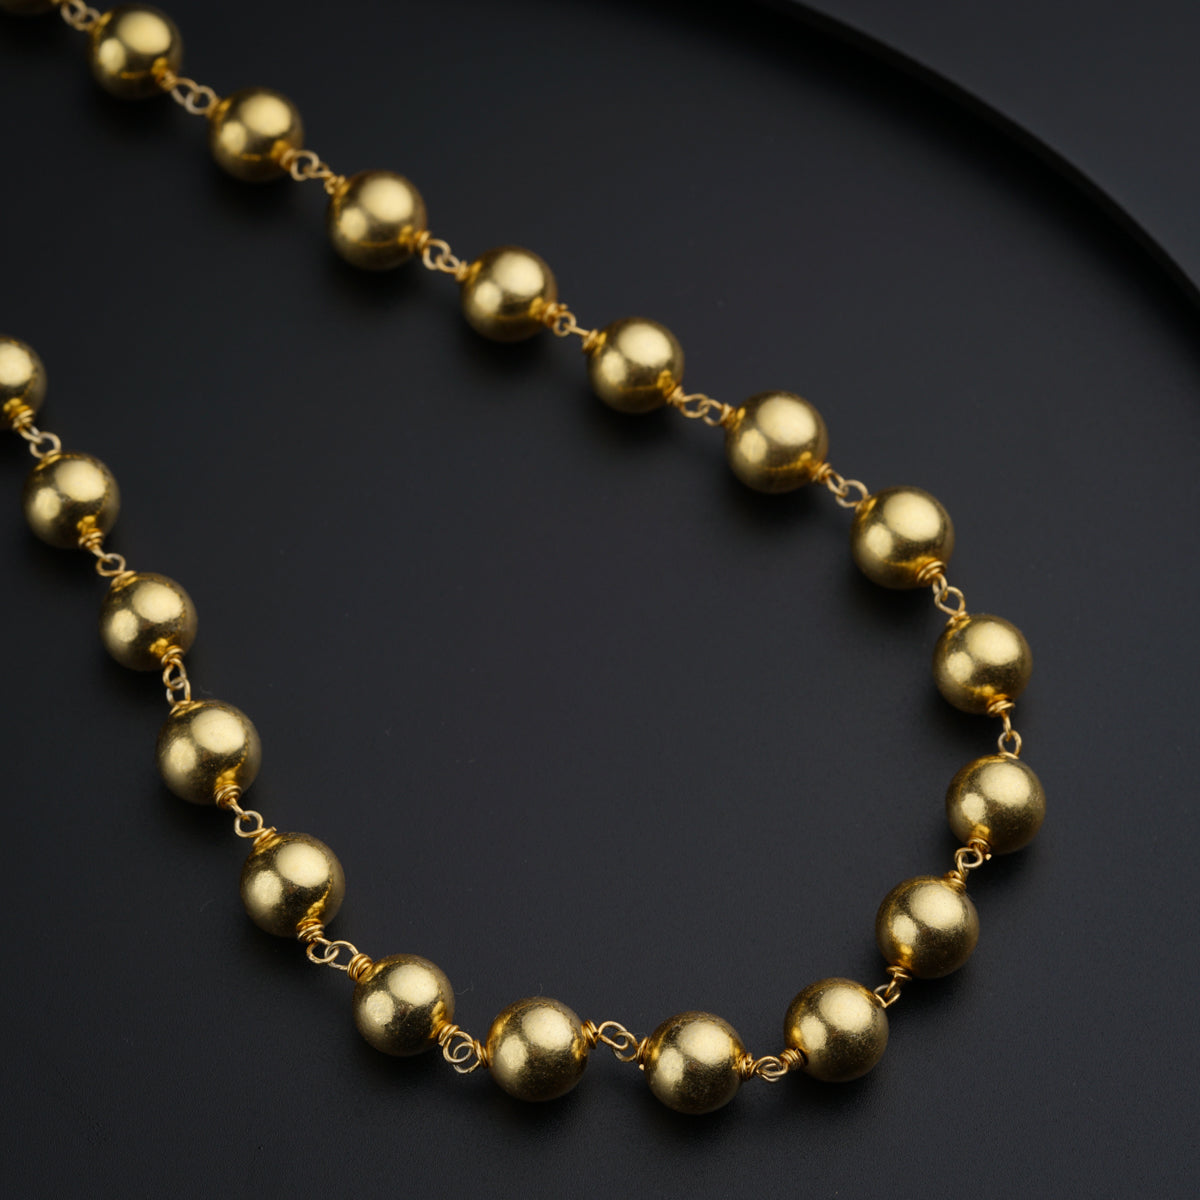 a gold beaded necklace on a black surface